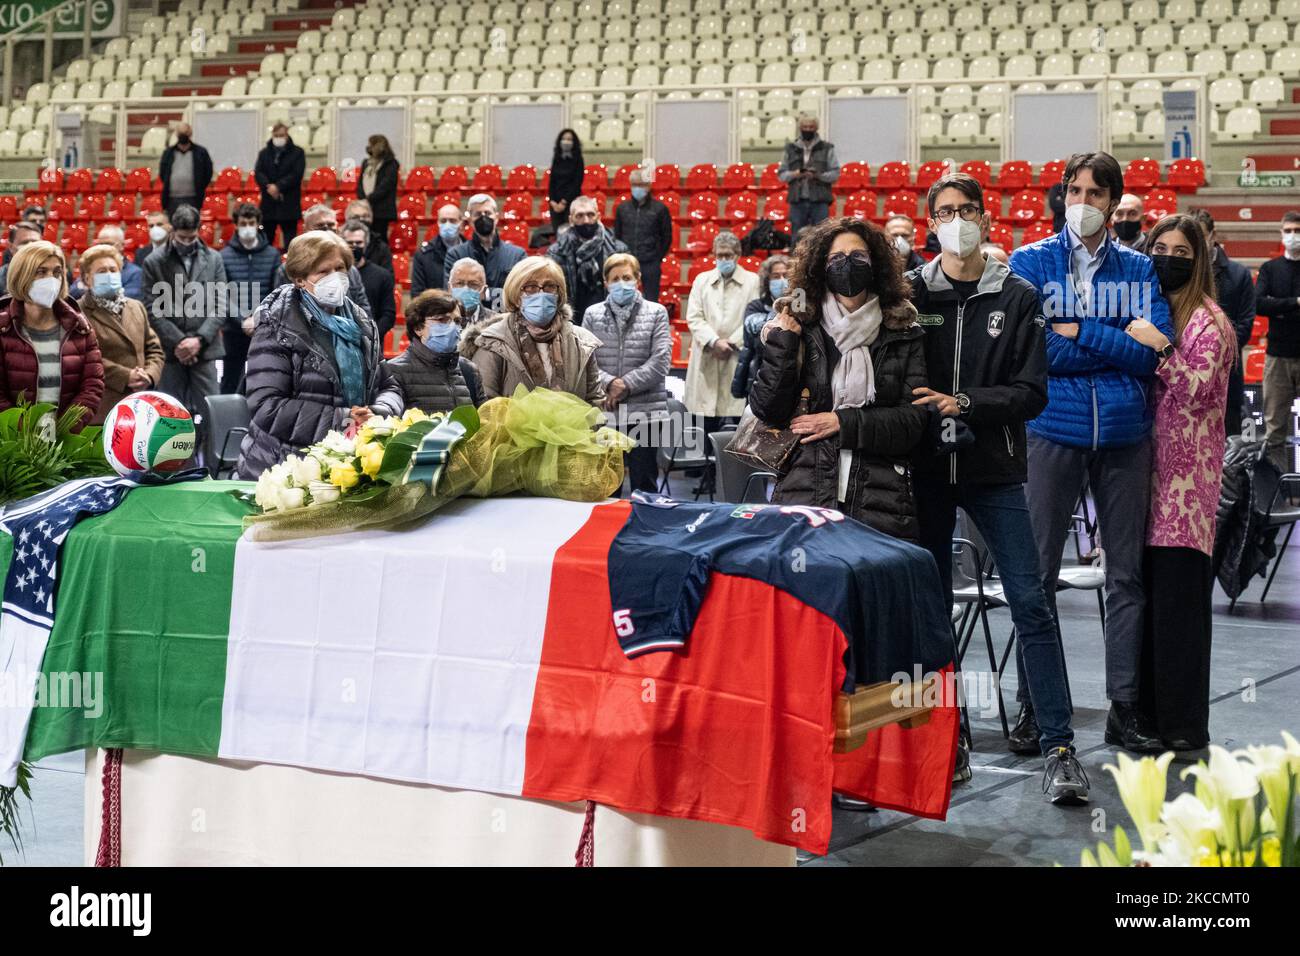 In the picture Michele Pasinato's coffin in the Kioene Arena with the family in the background with Silvia, Giorgio and Edoardo. The funeral of the volleyball player of the Italian national team, Michele Pasinato, struck down at the age of 52 by a tumor, took place today in Padua at the Kioene Arena. His teammates Martinelli, Zorzi, Lucchetta and Velasco are present. The city of Padua, where he coached the youth volleyball team, has tightened around his memory. On April 12, 2021, in Padova, Italy. (Photo by Roberto Silvino/NurPhoto) Stock Photo